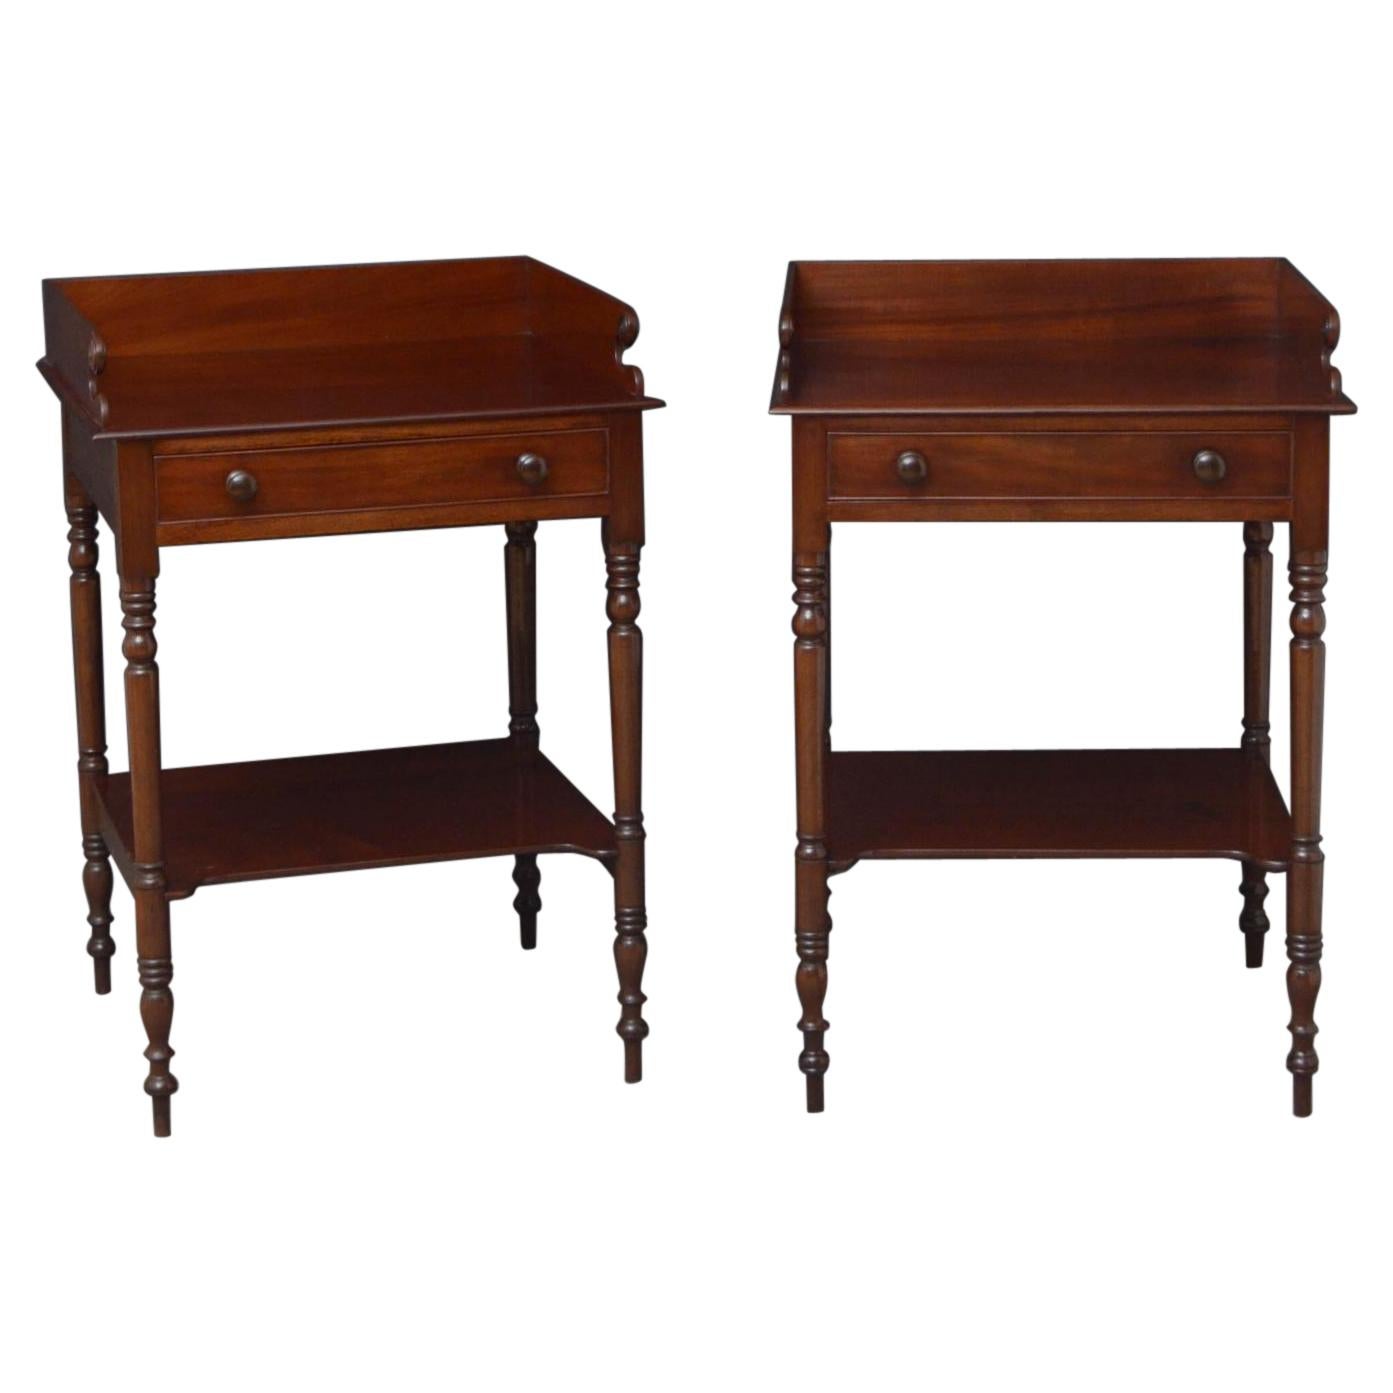 Rare Pair of Georgian Washstands / Bedside Tables